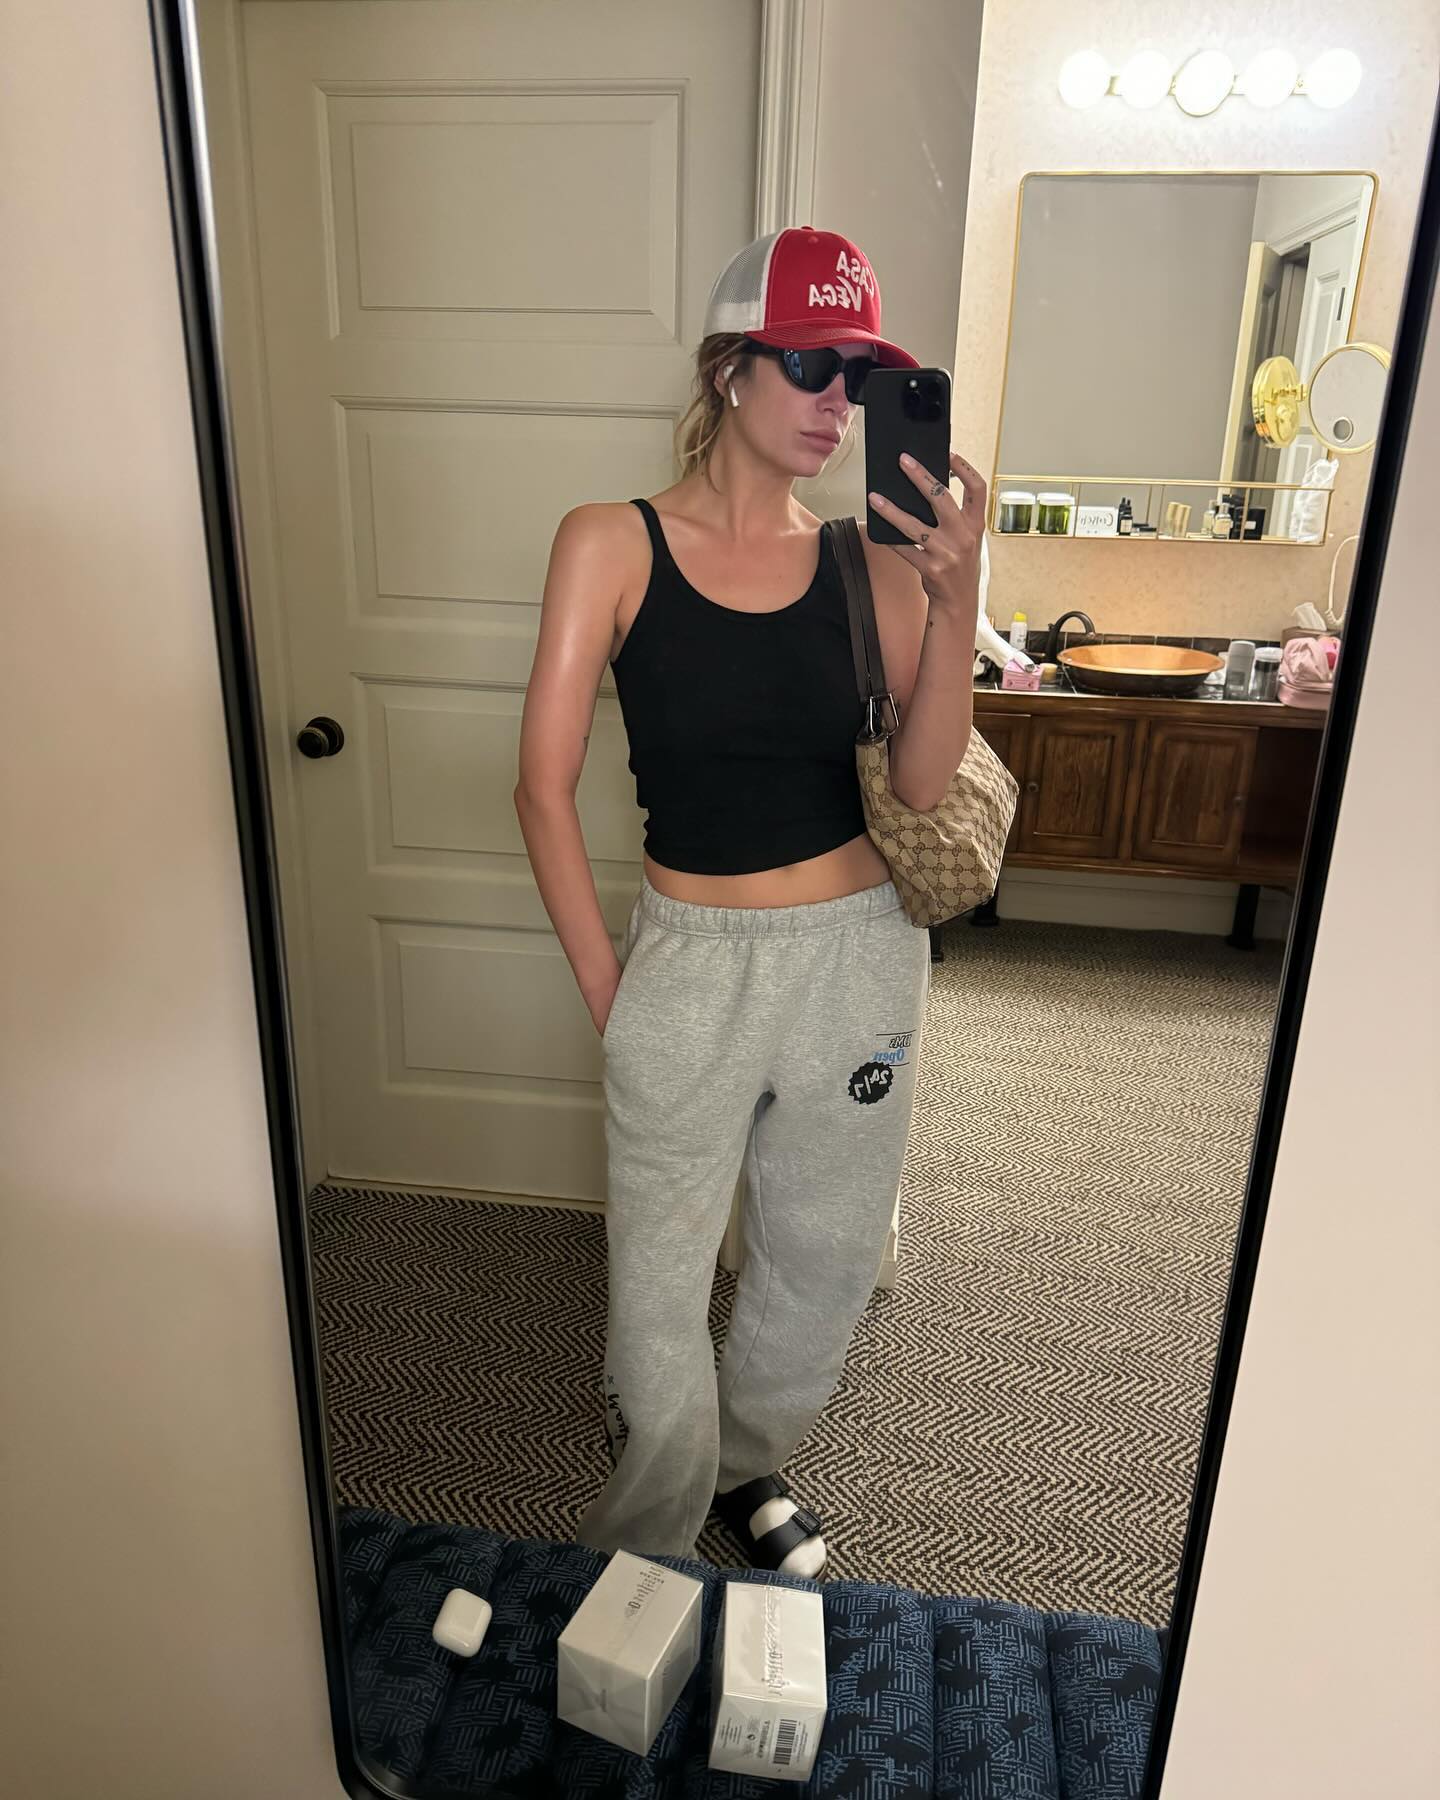 Some fans called the actress out after she showed off her slim figure in a new Instagram selfie